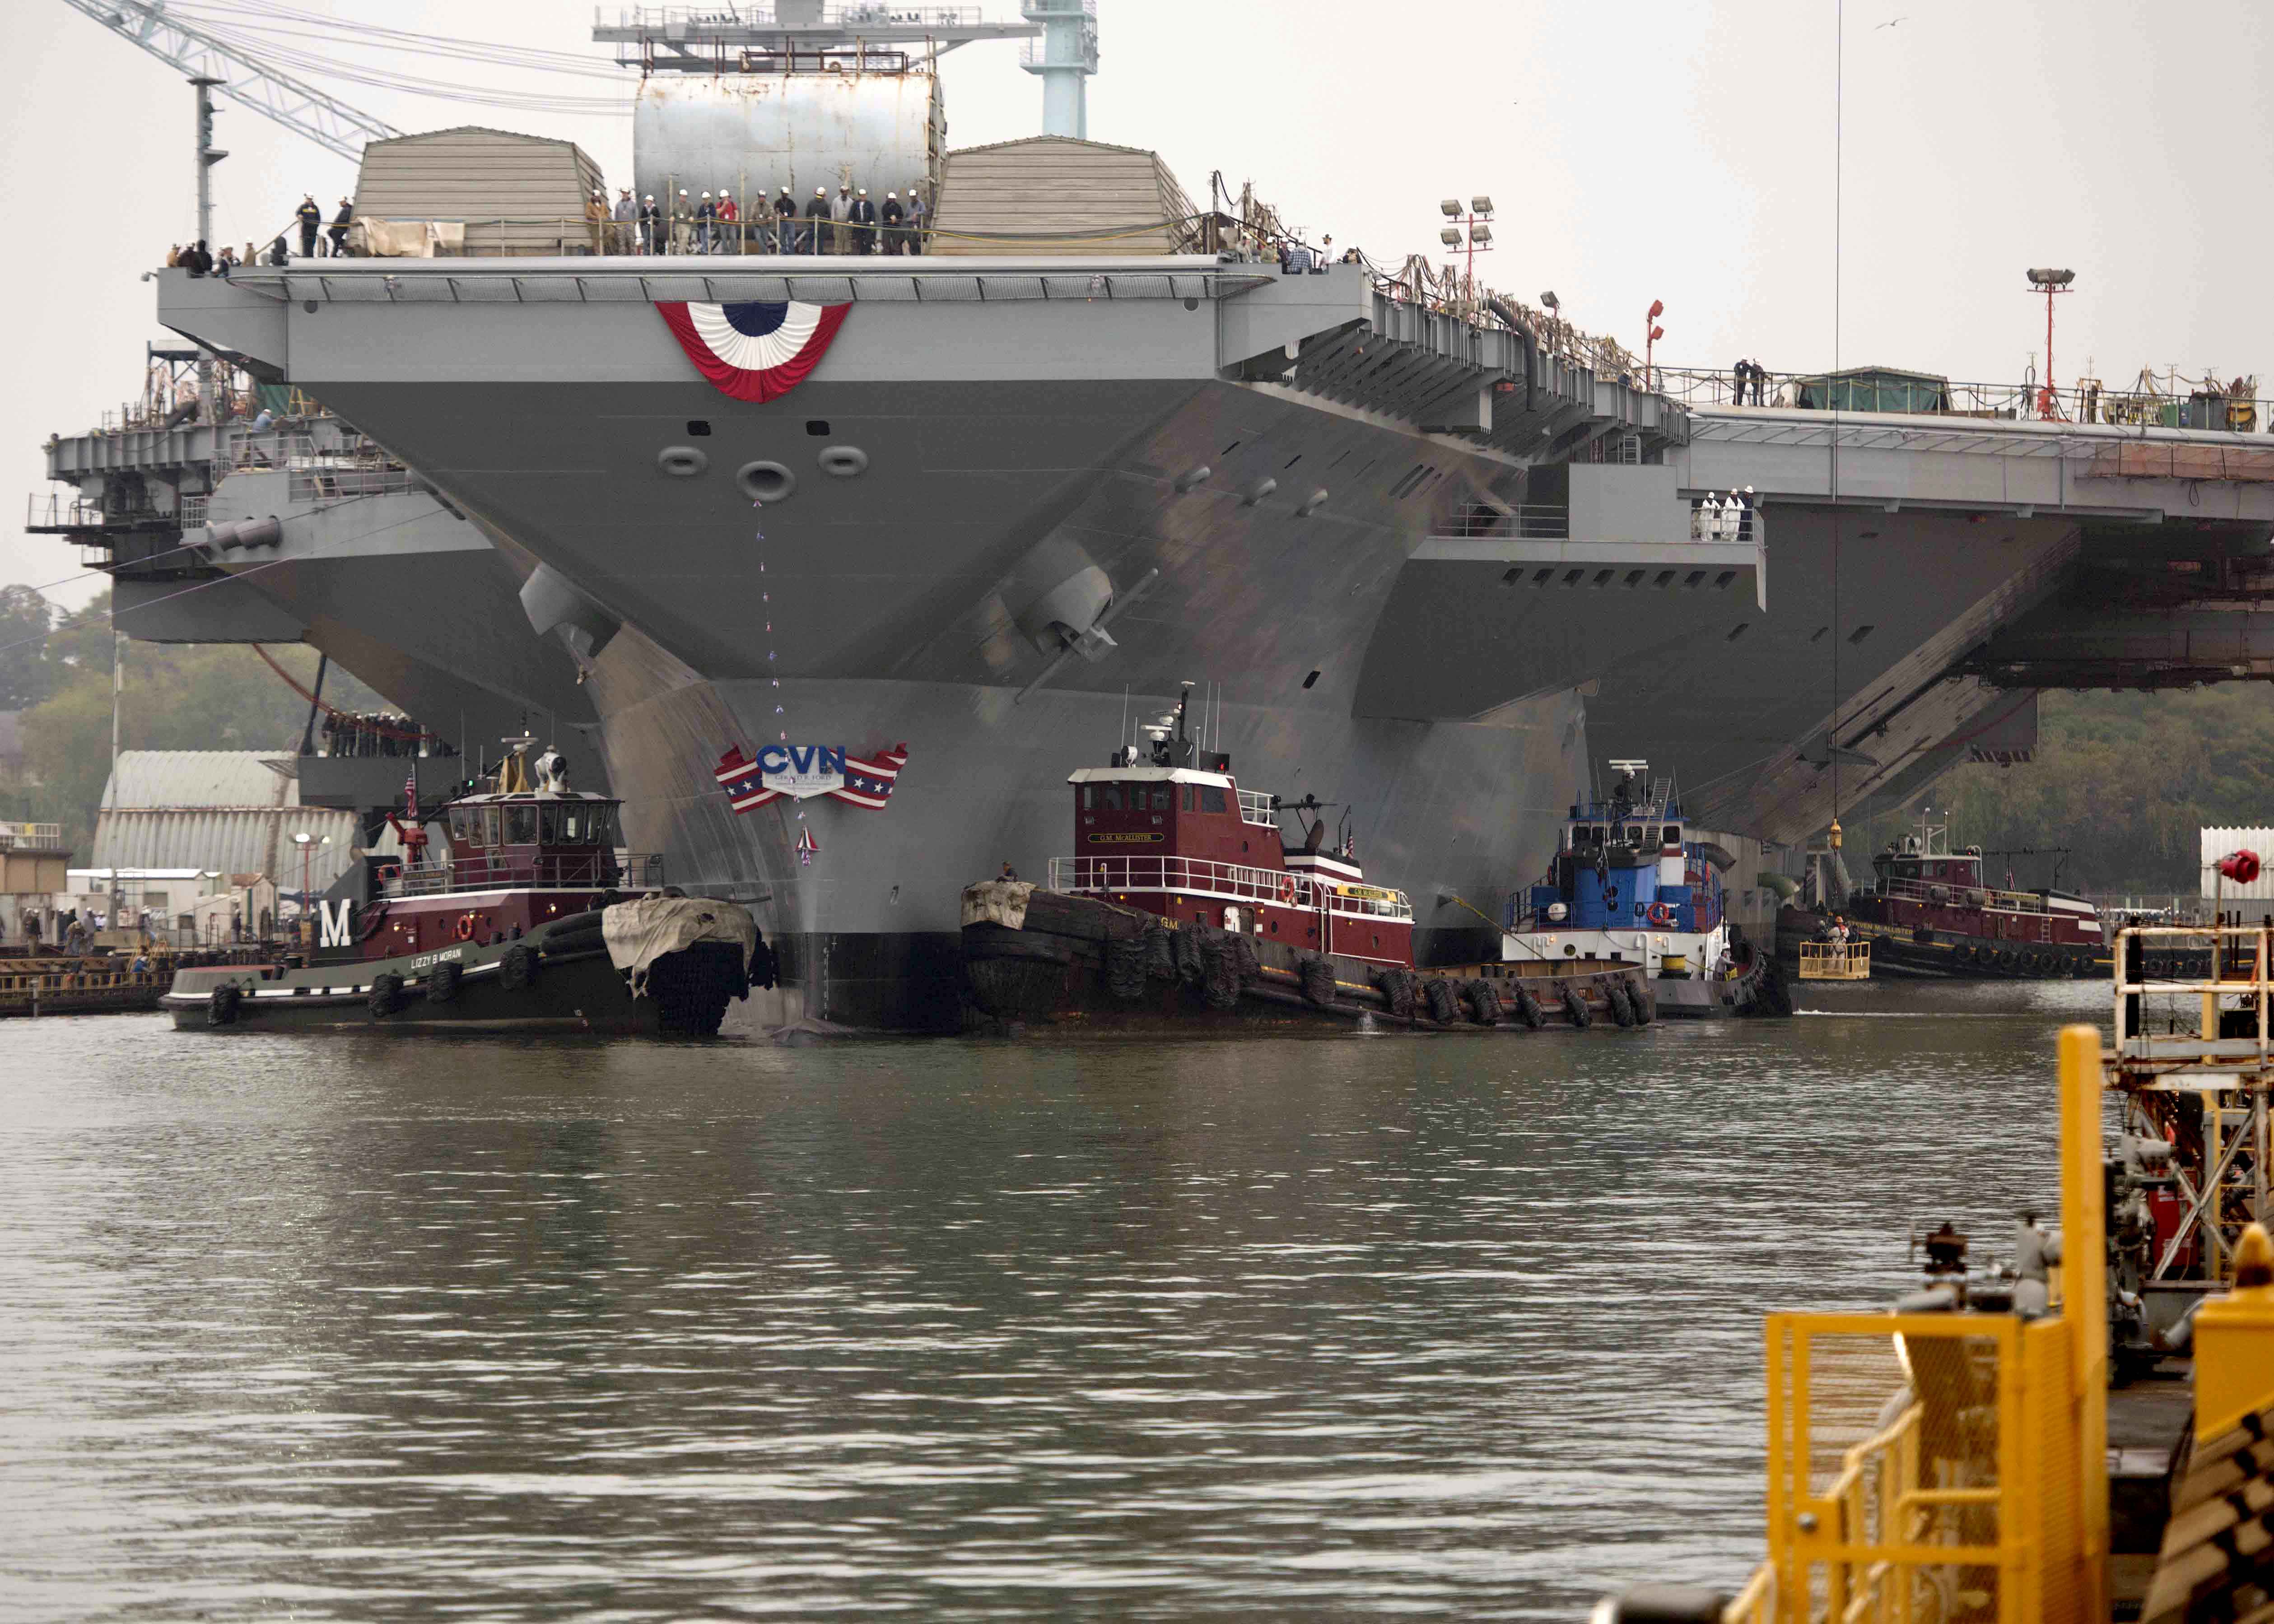 he aircraft carrier Gerald R. Ford (CVN 78) gets underway, beginning the ship’s launch and transit to Newport News Shipyard pier 3 for the final stages of construction and testing in November 2013. US Navy photo.